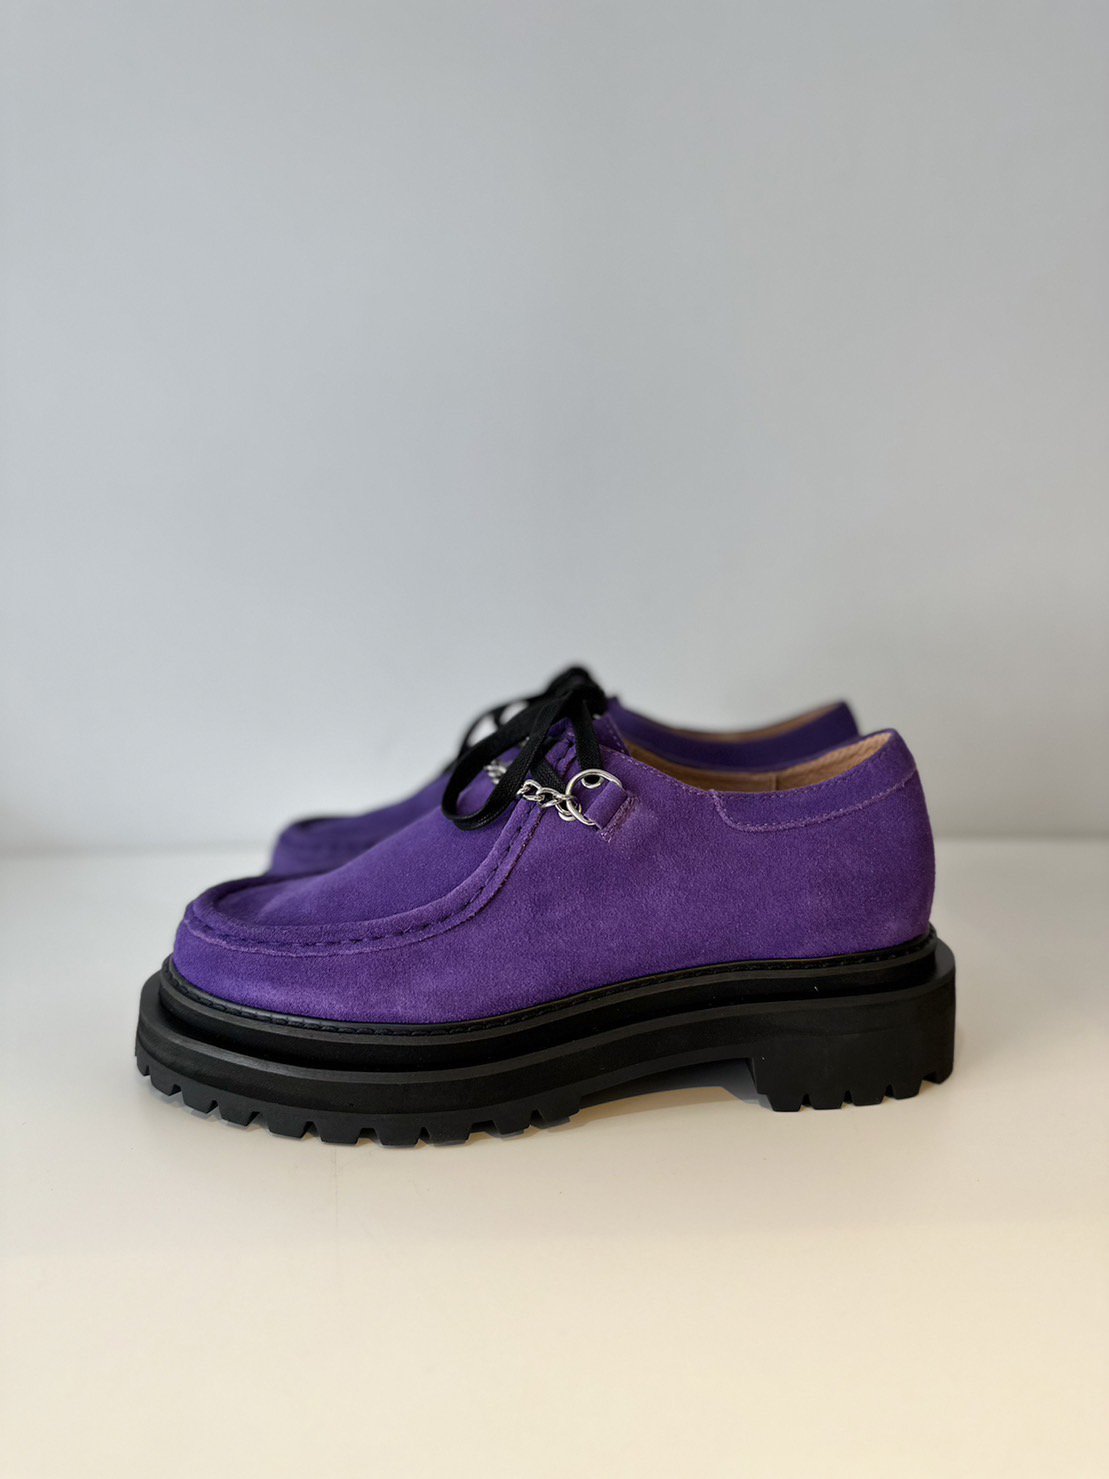 DAIRIKU<br />Suede Derby Shoes / Purple<img class='new_mark_img2' src='https://img.shop-pro.jp/img/new/icons14.gif' style='border:none;display:inline;margin:0px;padding:0px;width:auto;' />